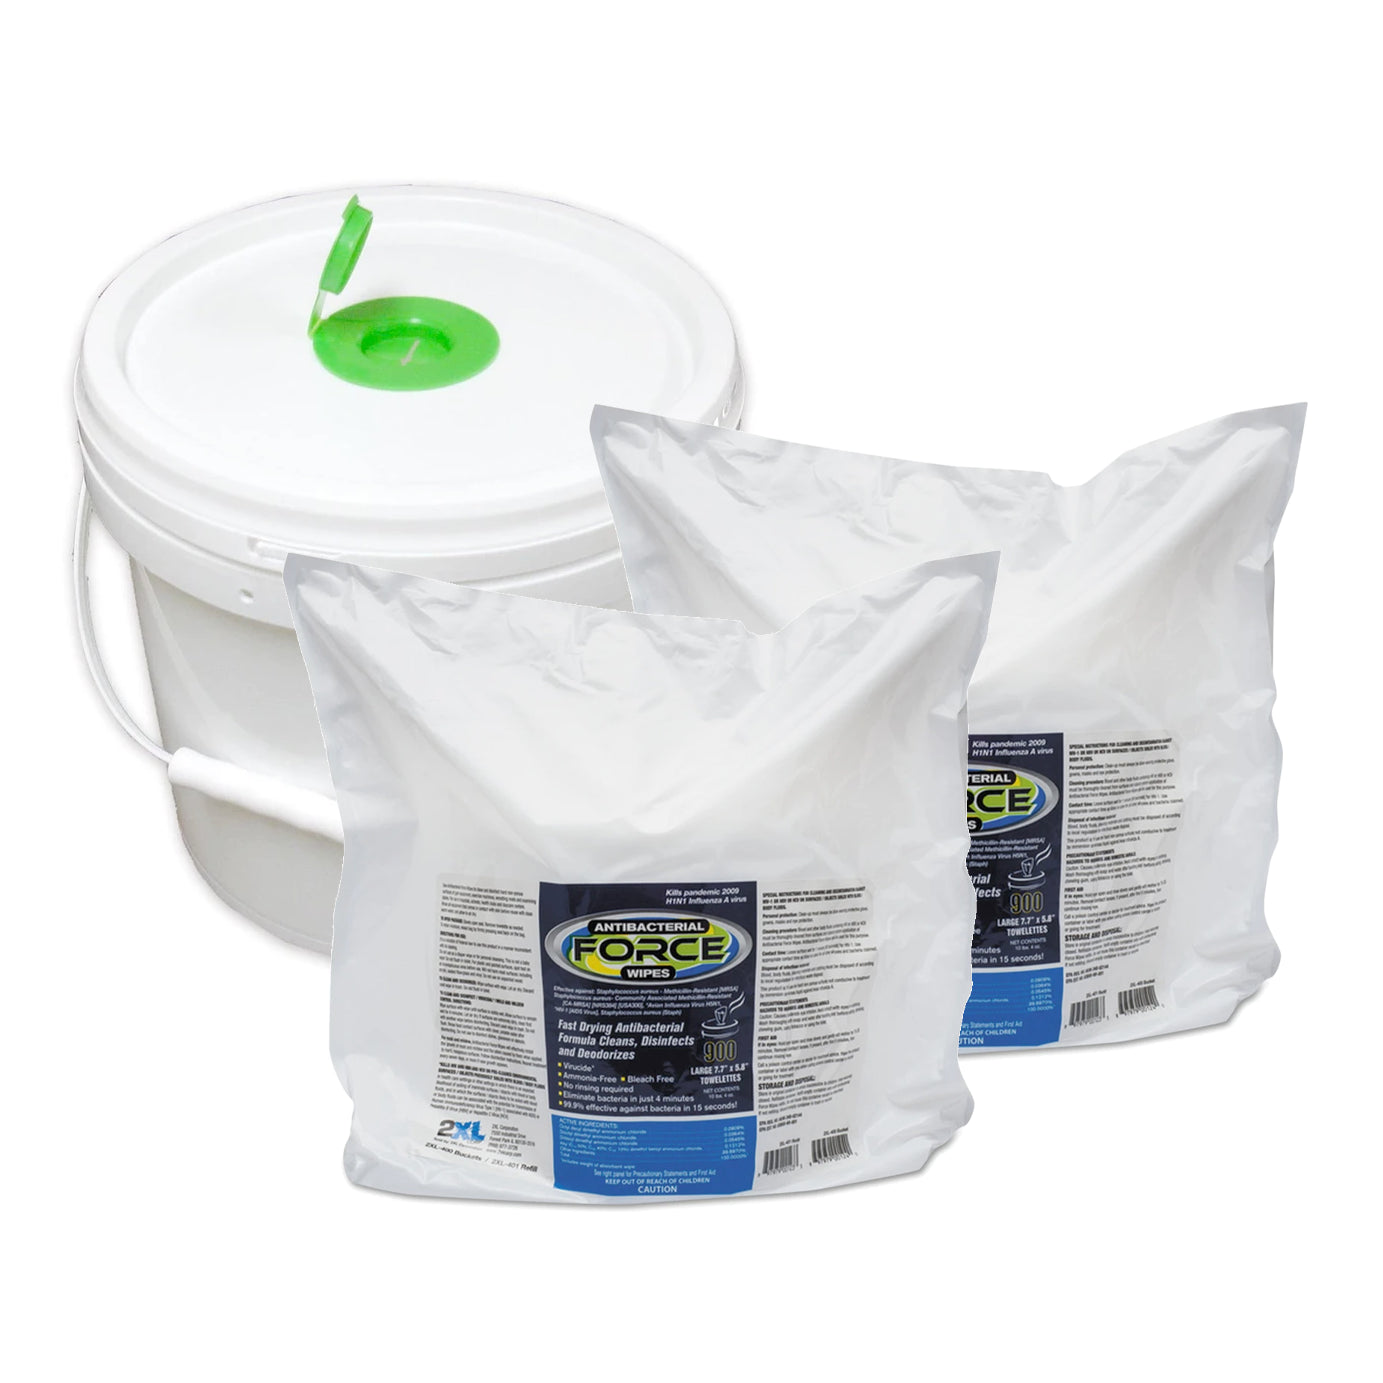 2XL Force Disinfecting Wipes,  900/Pack, 2/Carton, Includes Reusable Wipes Bucket